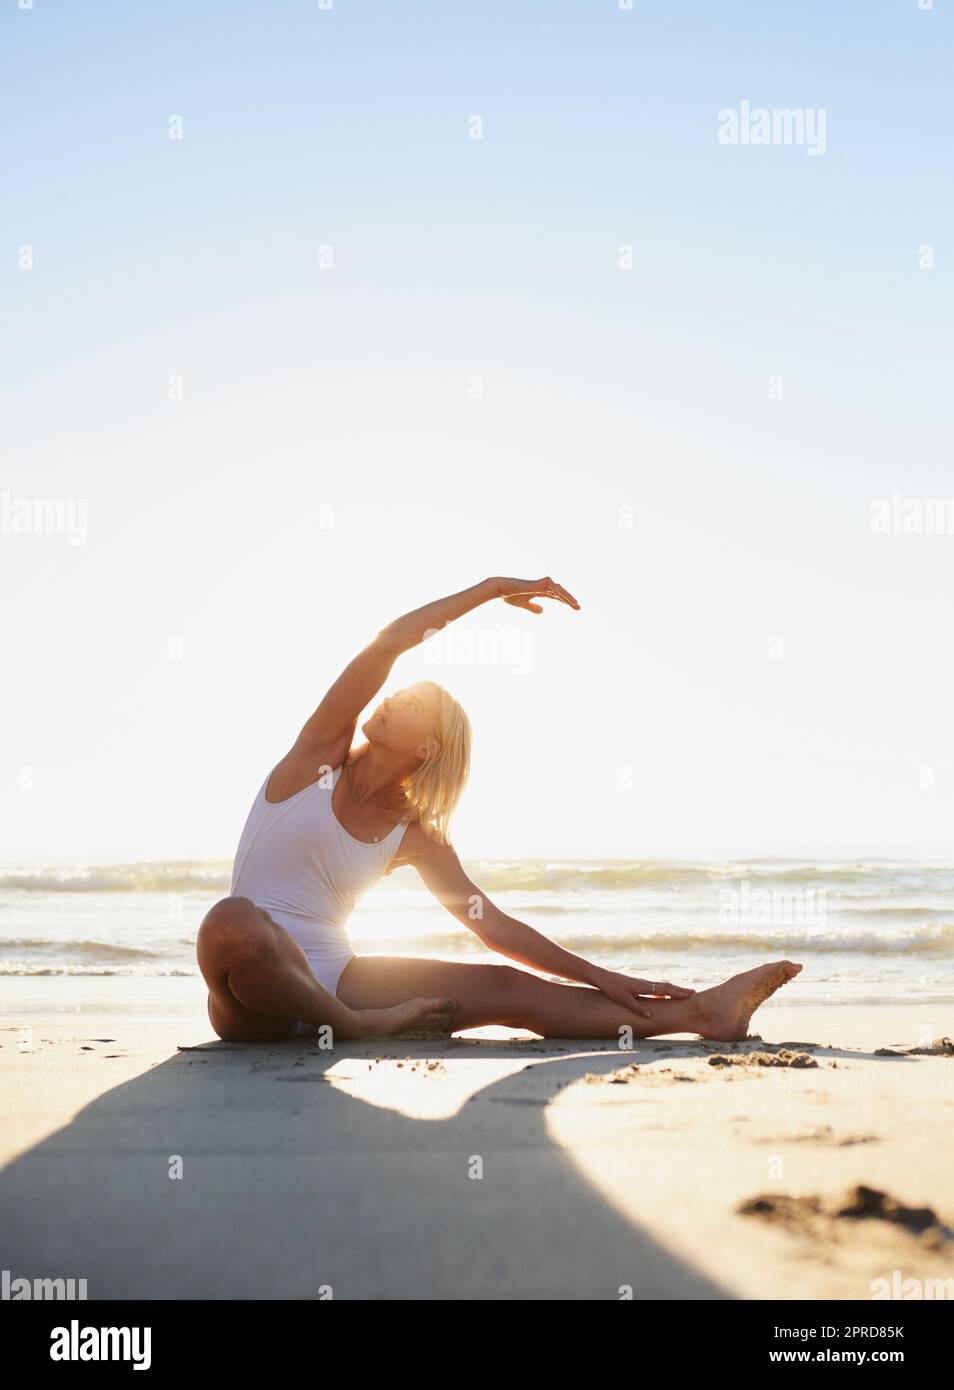 Paying attention to how my body feels. Full length shot of an attractive young woman doing a yoga stretch early in the morning on the beach. Stock Photo